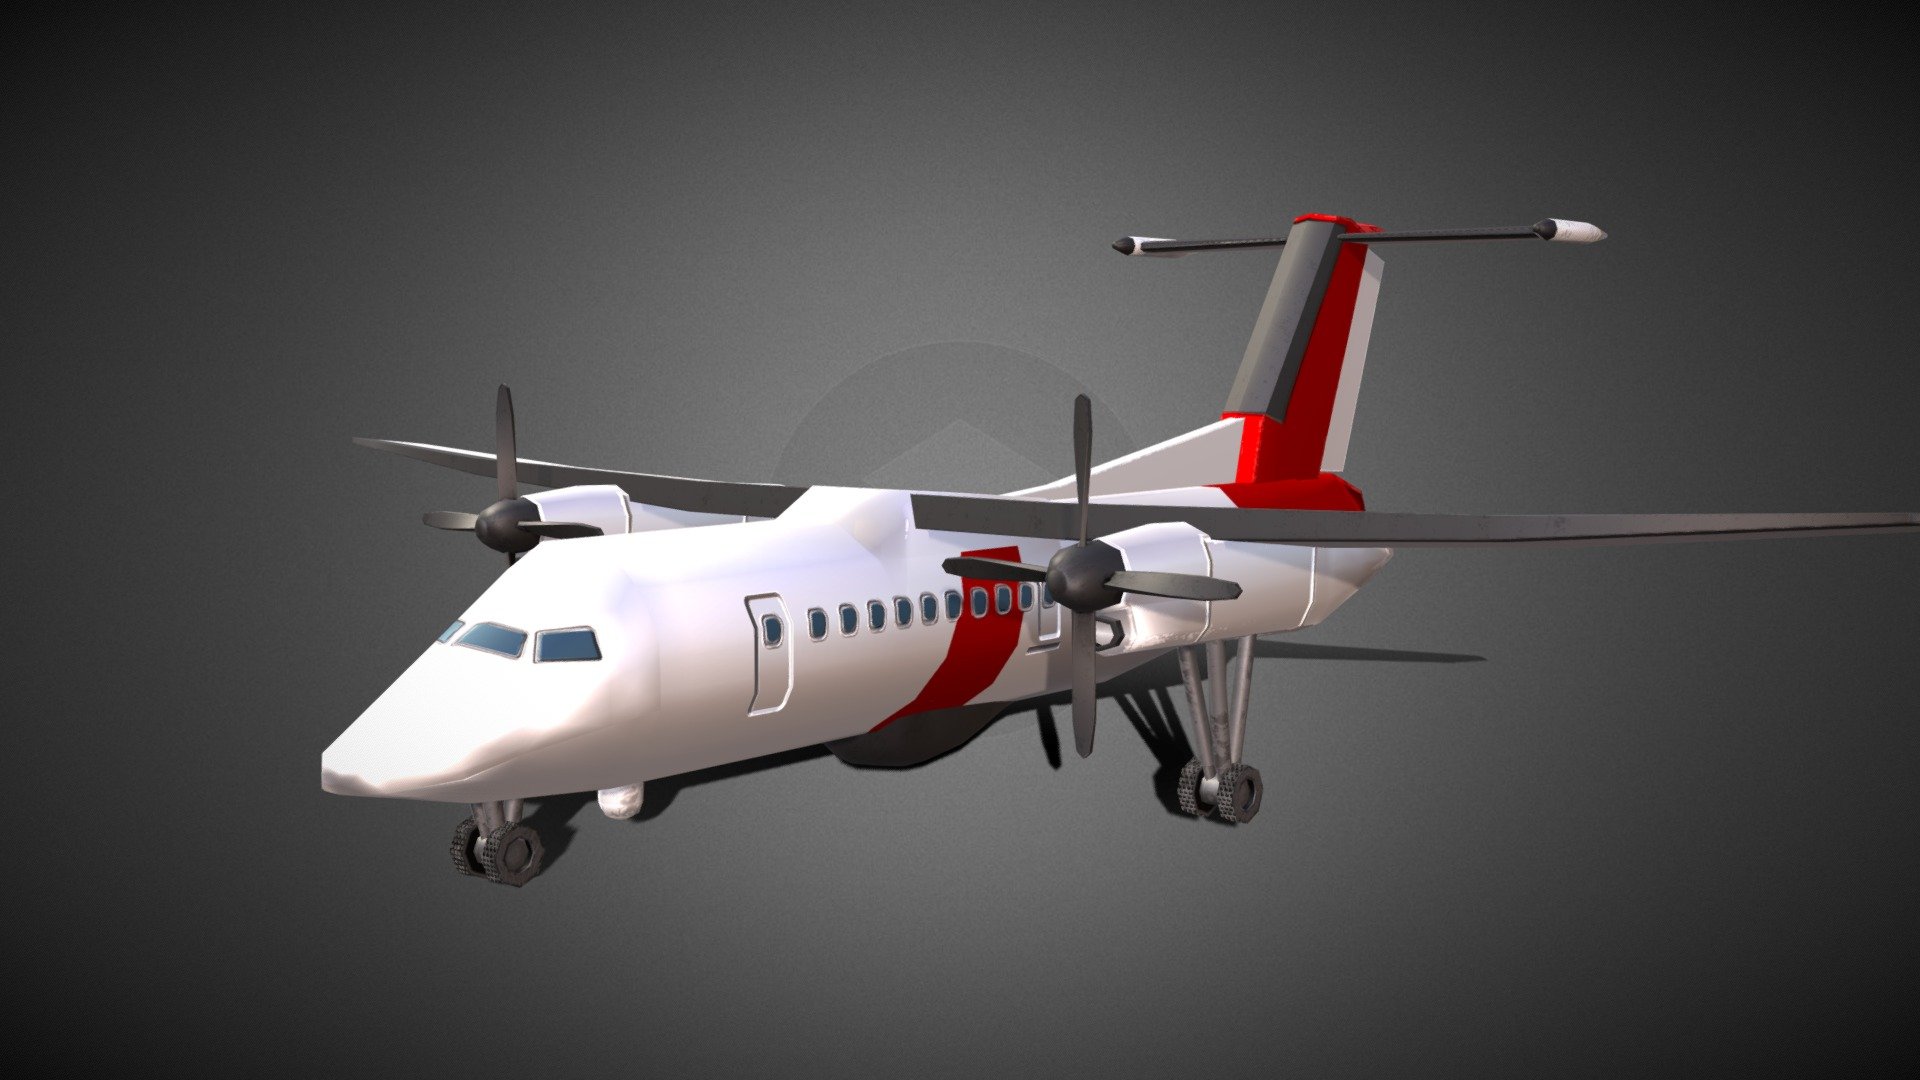 Dash 8 Aircraft a low poly vehicle ready for an engine like Unity or Unreal ideal for a RTS, Isometric or a War Video Game it has 1617 verts 2800 tris and 3006 edges and the texture is 2048 x 2048 and includes Diffuse, Metal and Normal Map the format is .PNG and the model is available as OBJ, MB and FBX all the pieces are named If you need 3D Game Assets or STL Files I can do commission works 3d model